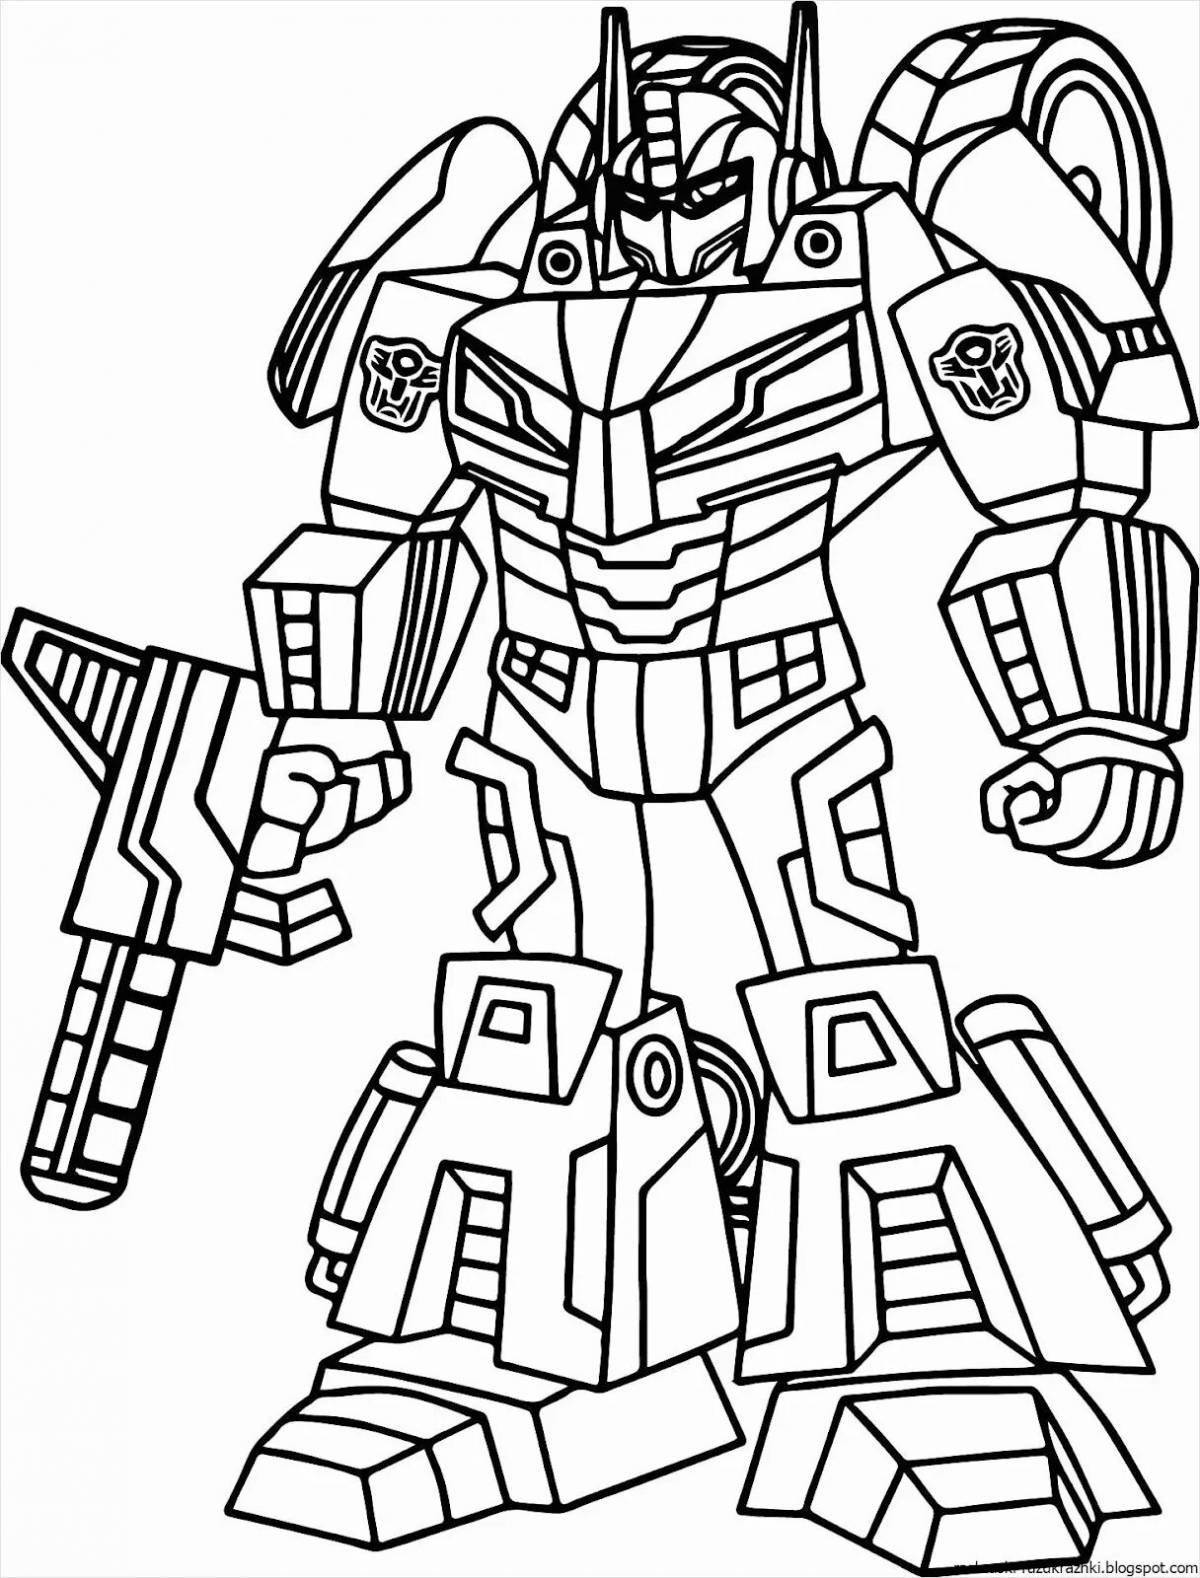 Fun robot coloring book for 5-6 year old boys